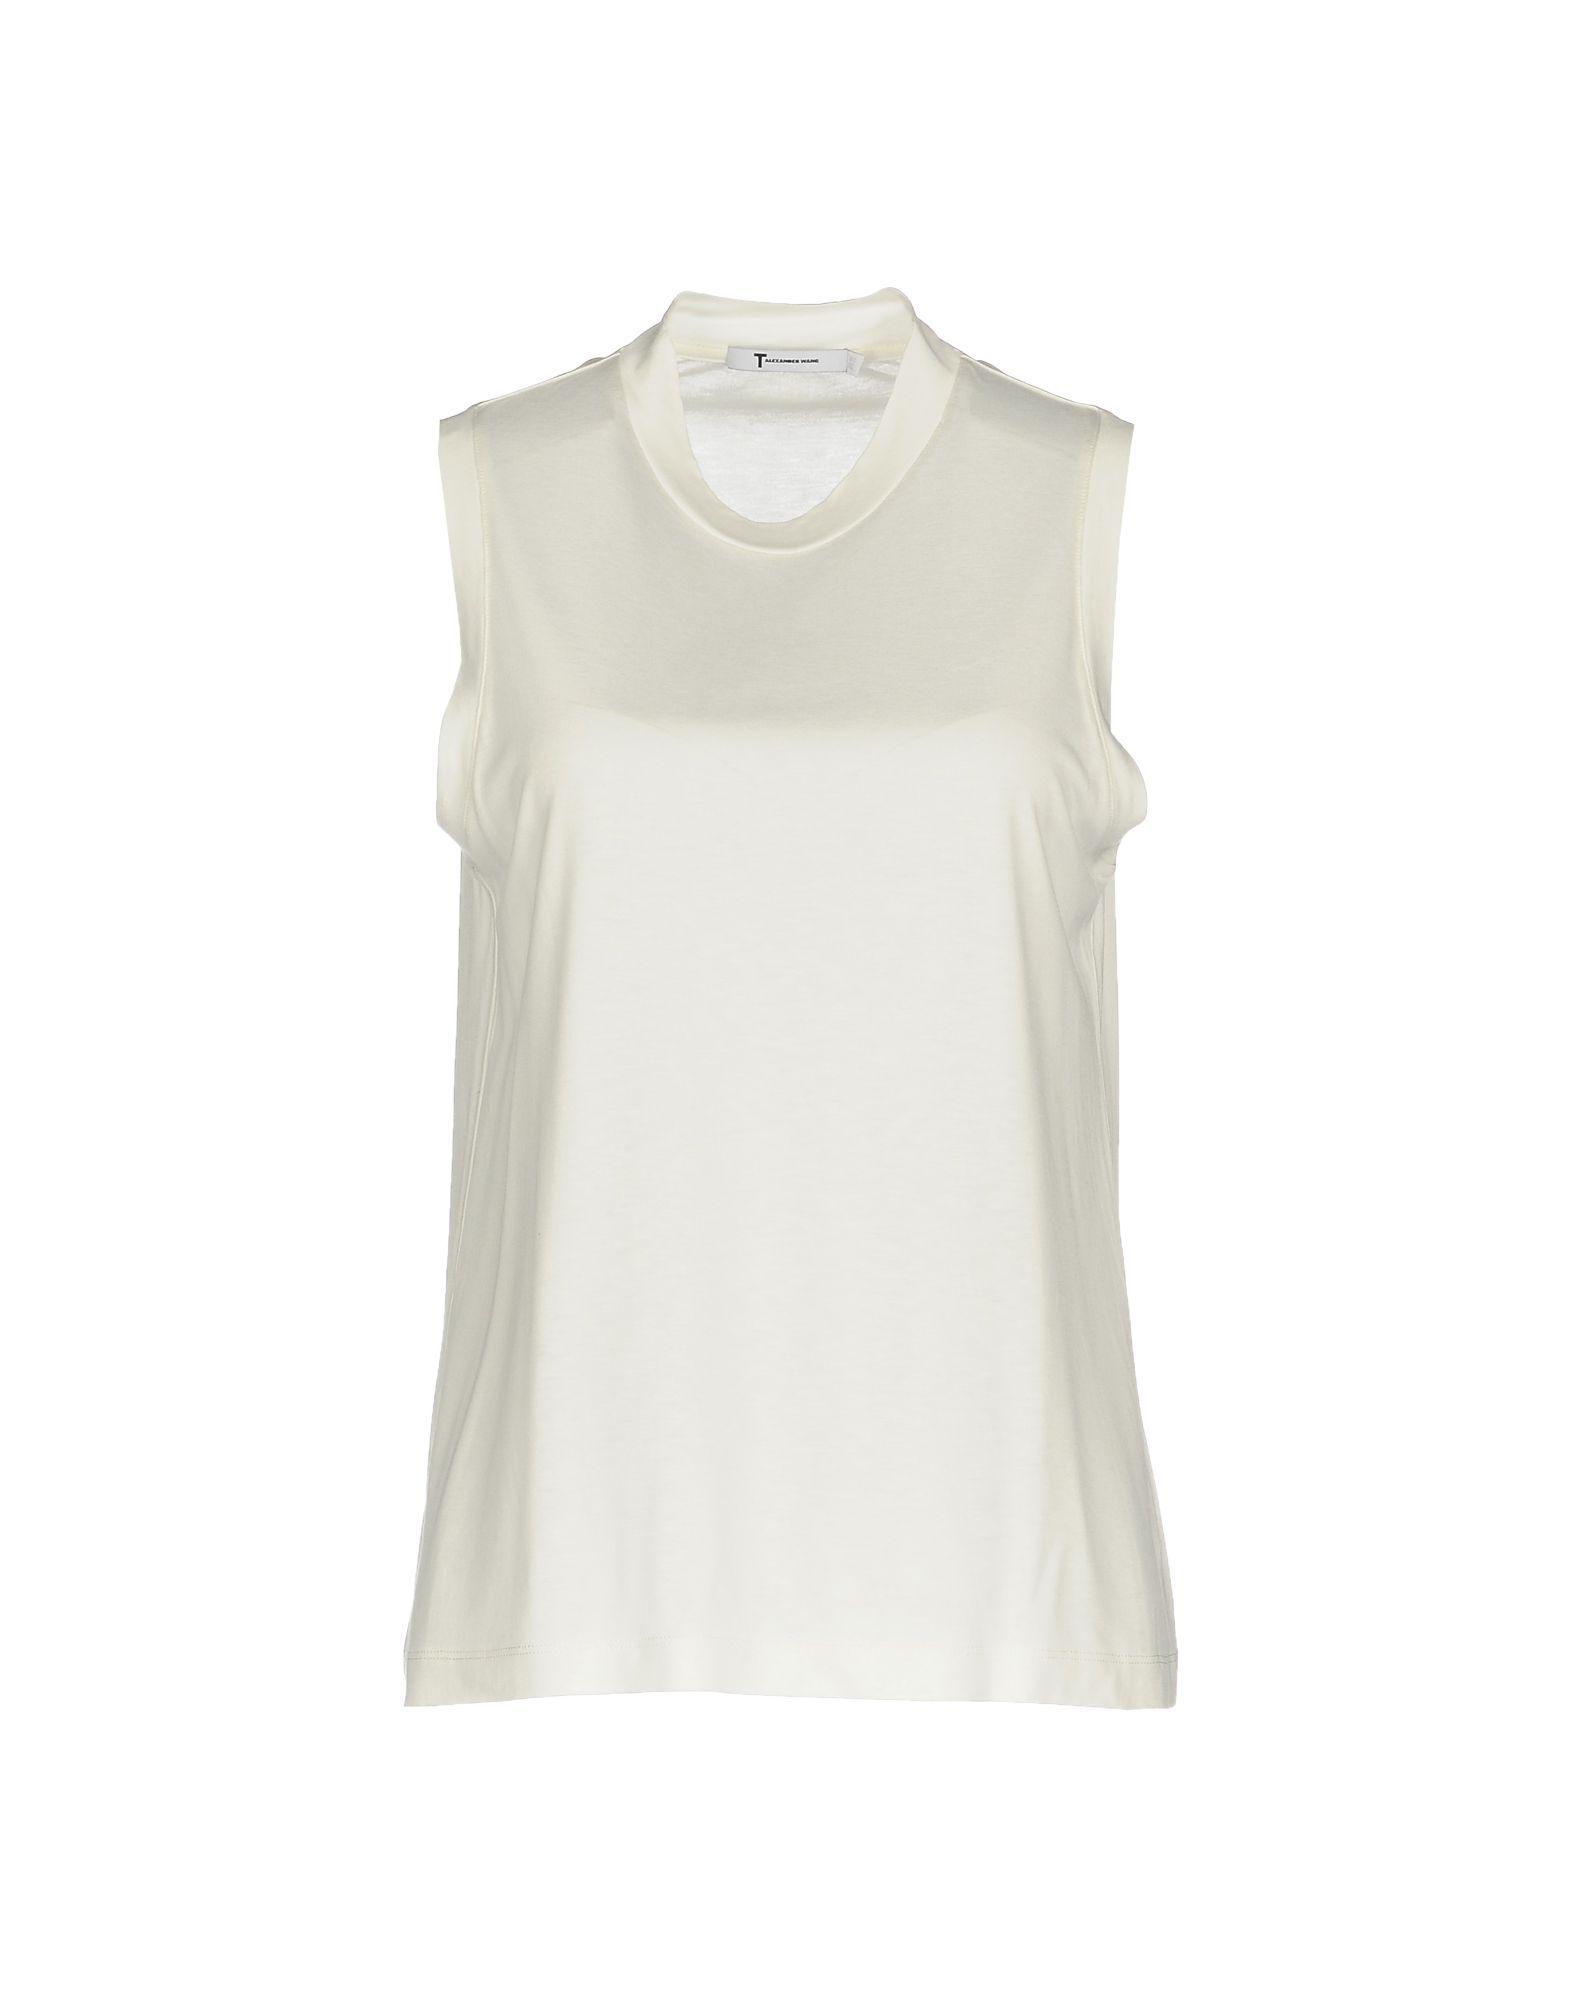 T By Alexander Wang Synthetic T-shirt in White - Lyst